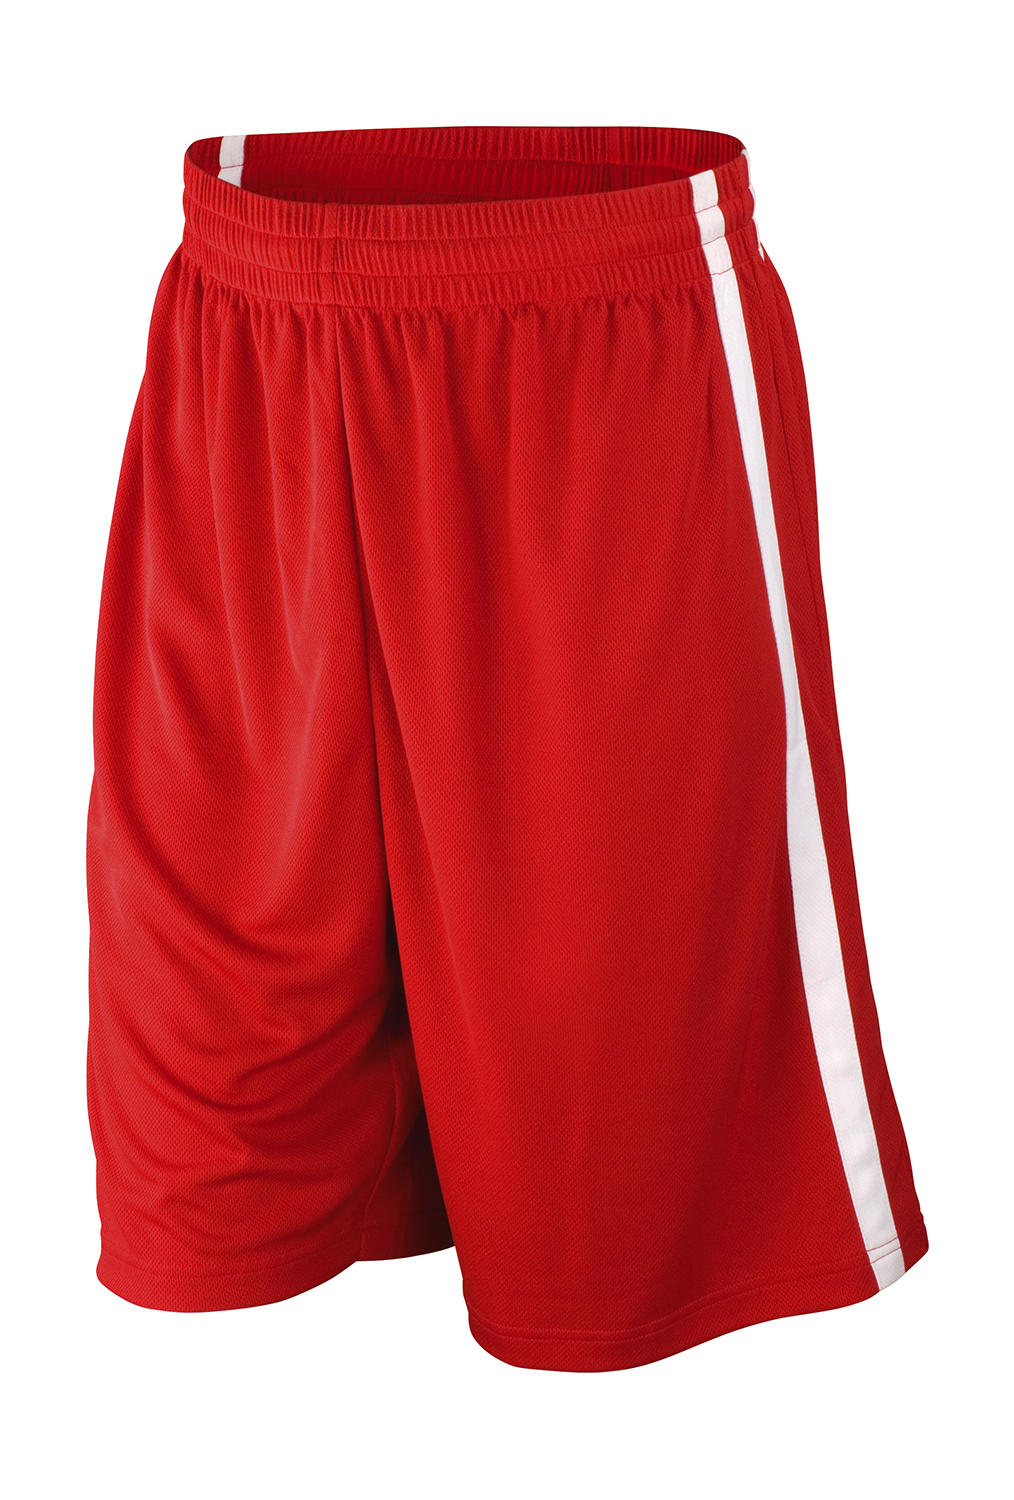  Mens Quick Dry Basketball Shorts in Farbe Red/White